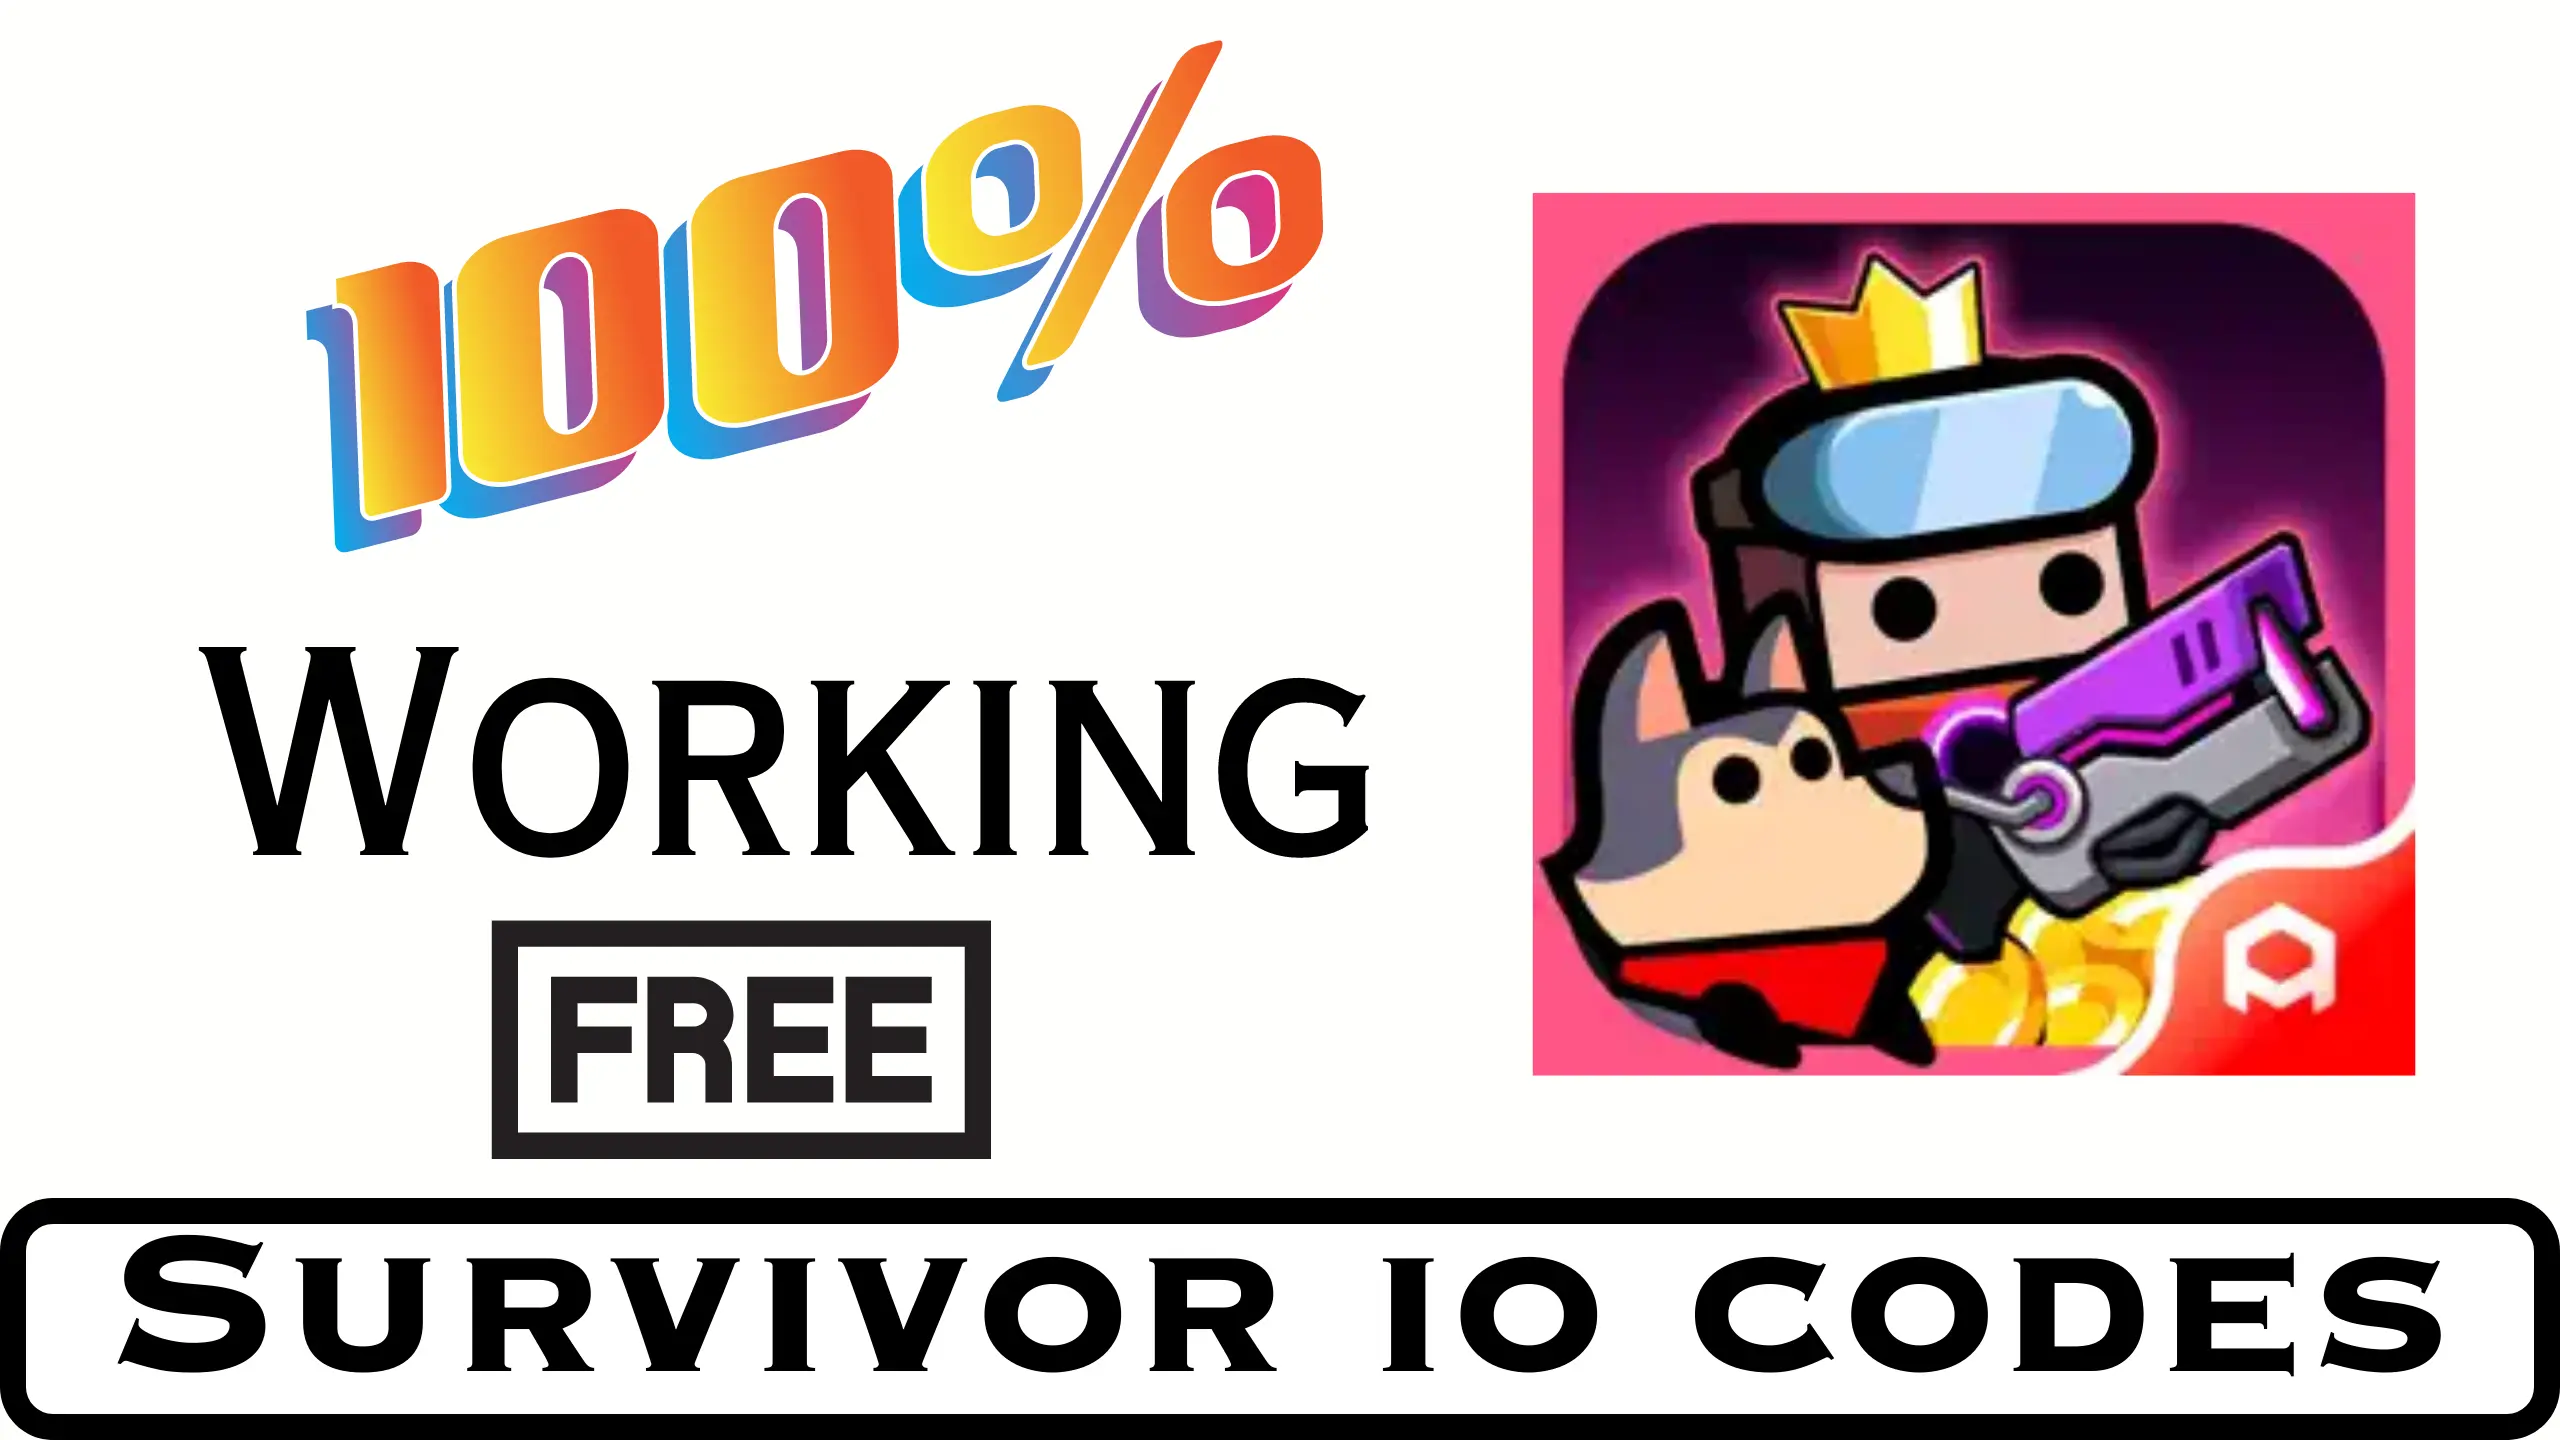 Free Survivor.io Codes and How to Redeem Them (August 2022